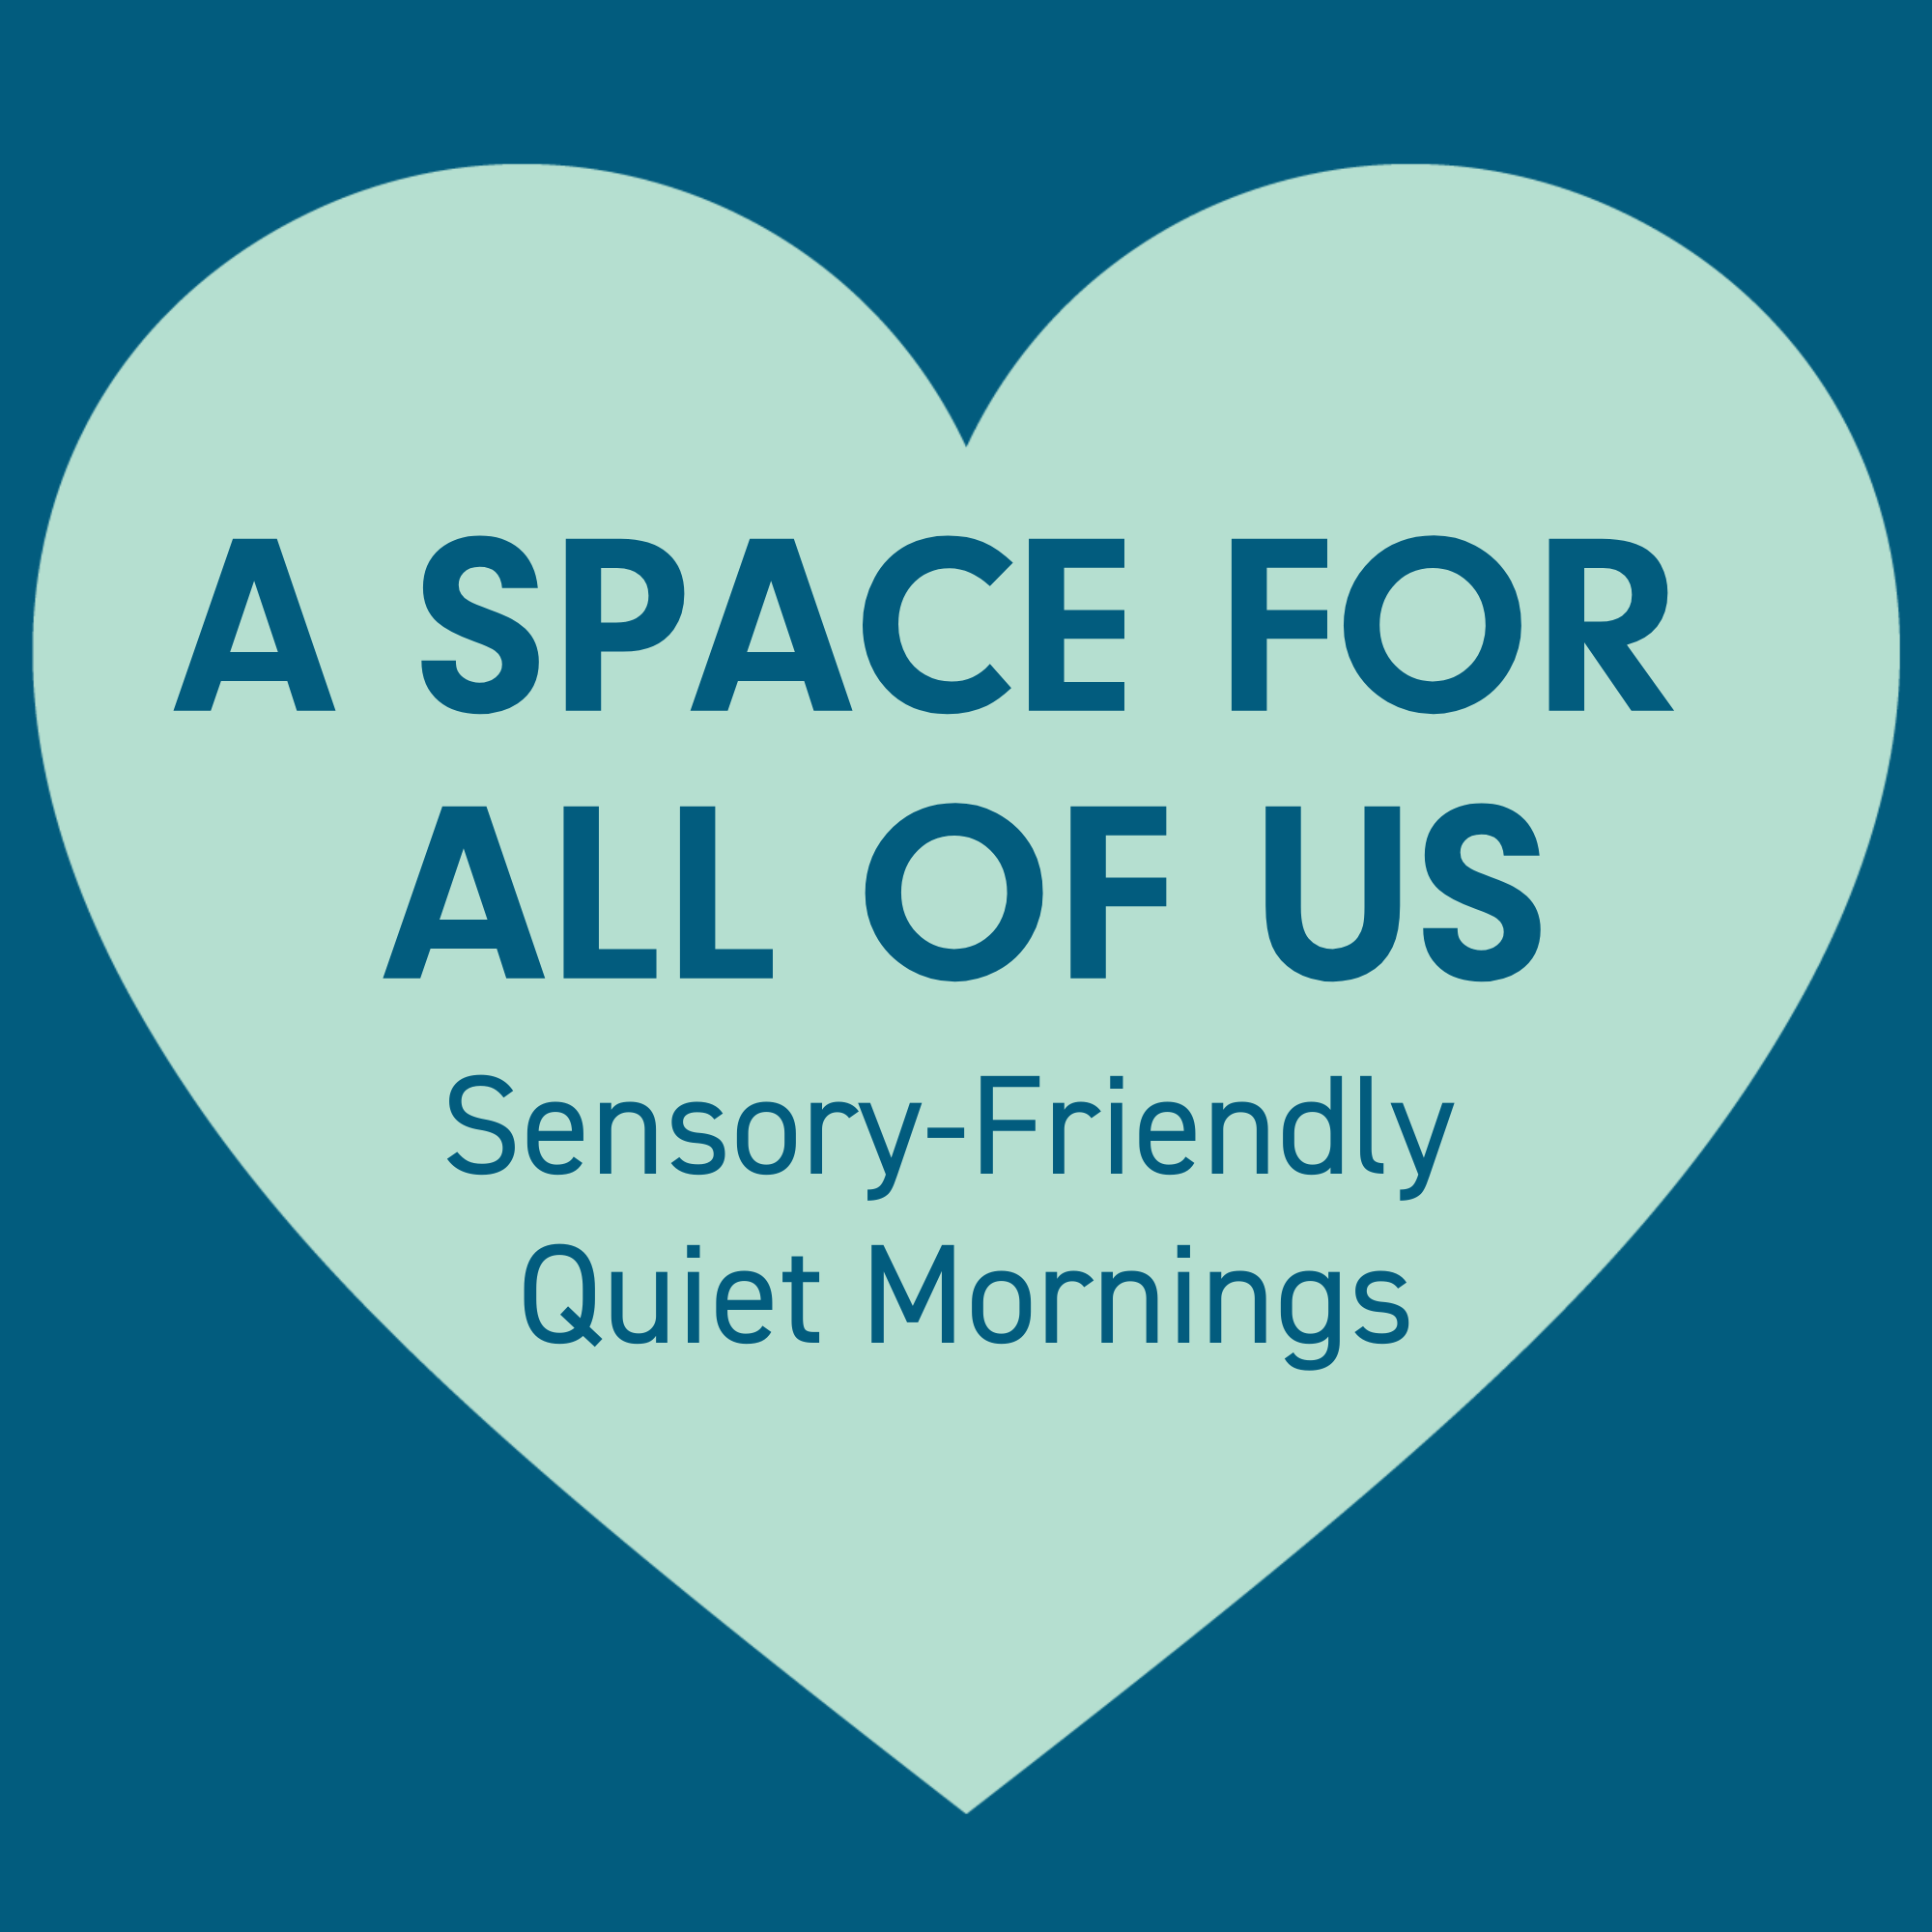 Dark blue graphic with light green heart icon, and text within the heart reading A Space for All of Us Sensory-Friendly Quiet Mornings